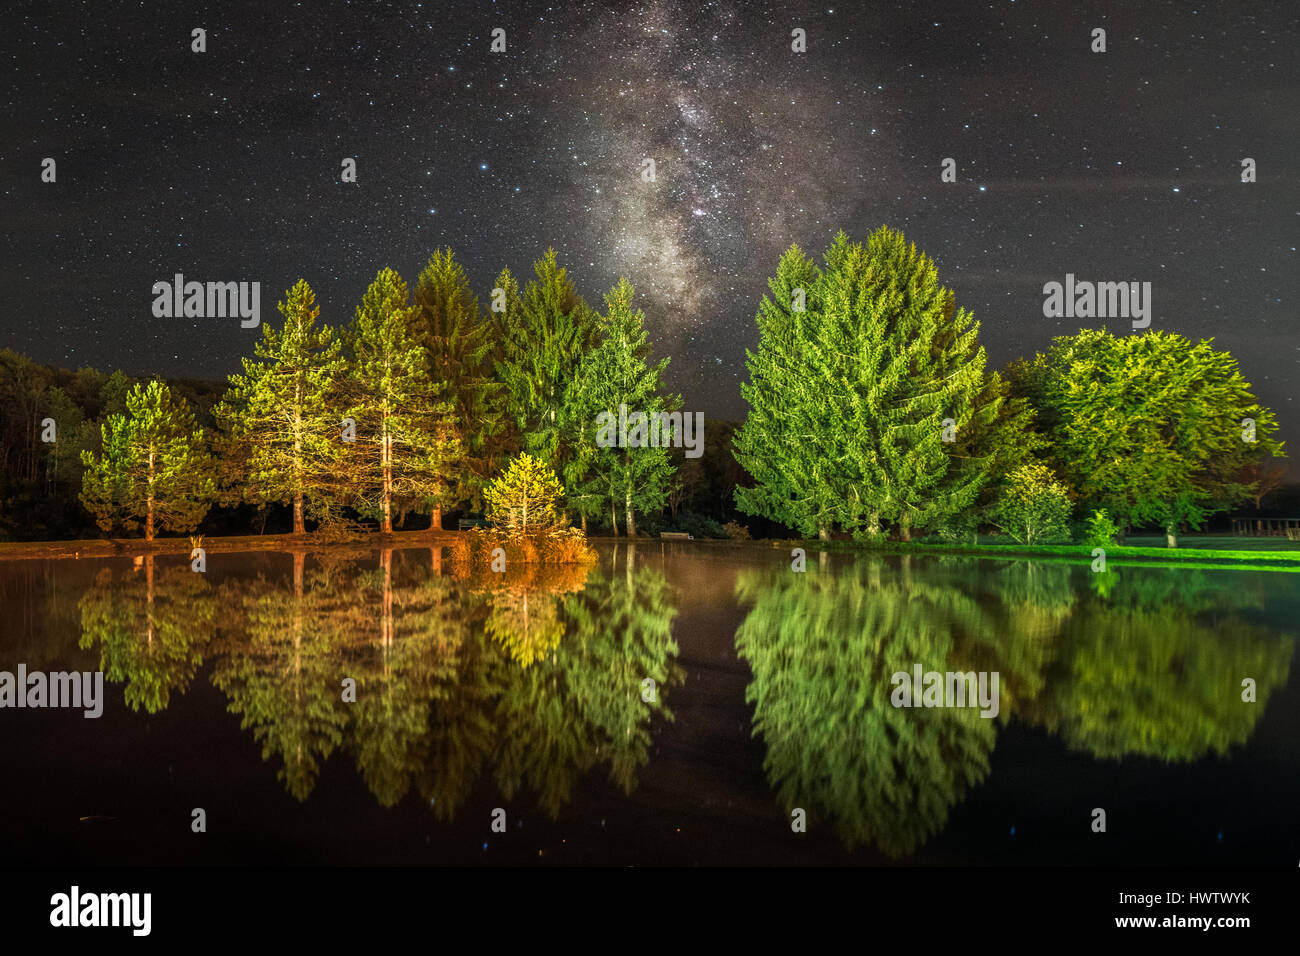 the Milky Way can be seen from within the city limits of Davis, West Virginia, as it is here reflecting in this pond in the park. Stock Photo